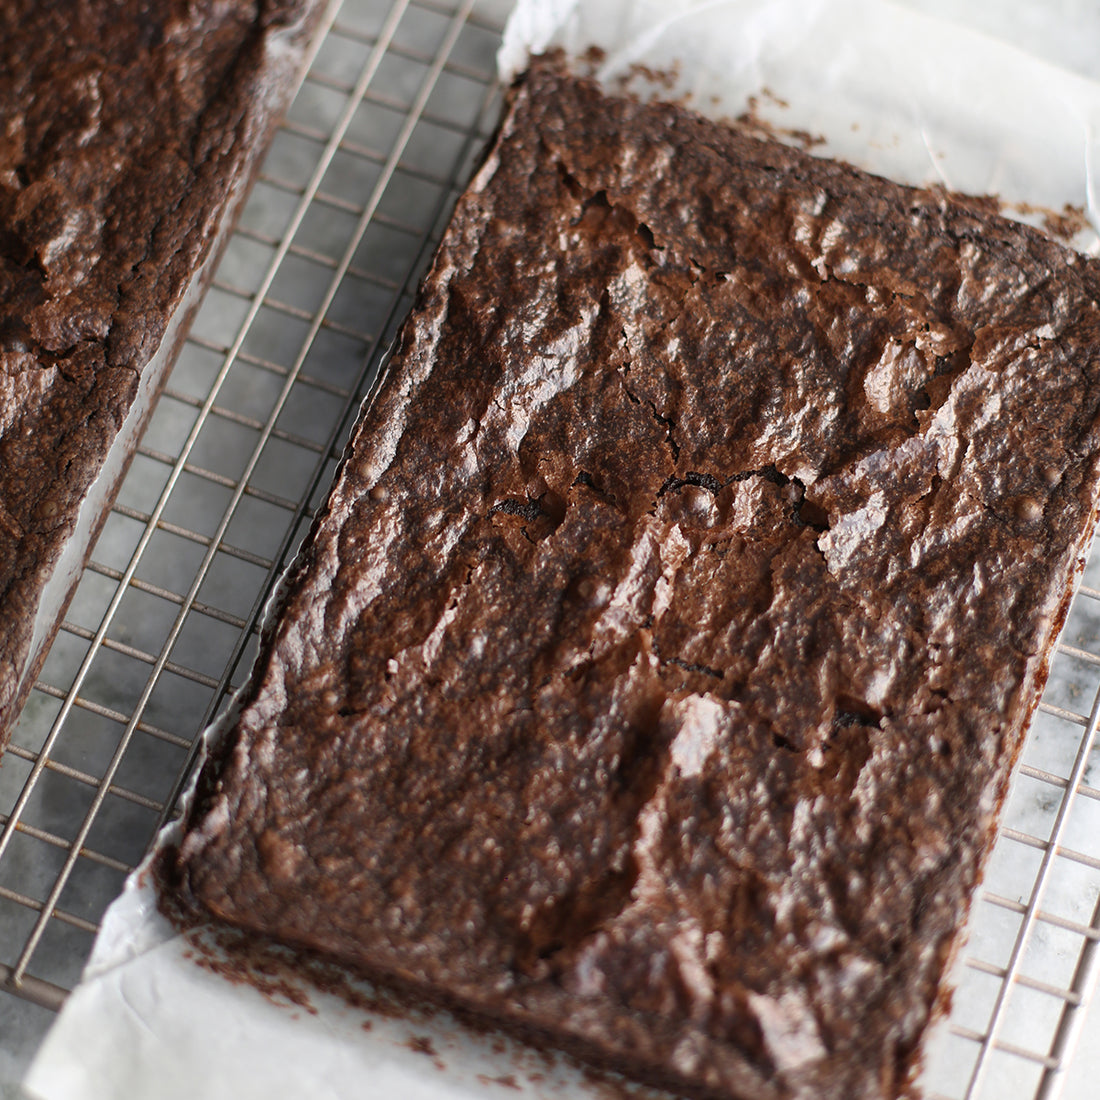 Chocolate brownies are a classic American dessert. We frequently debate their finer points – fudgy, chewy, or cakey?